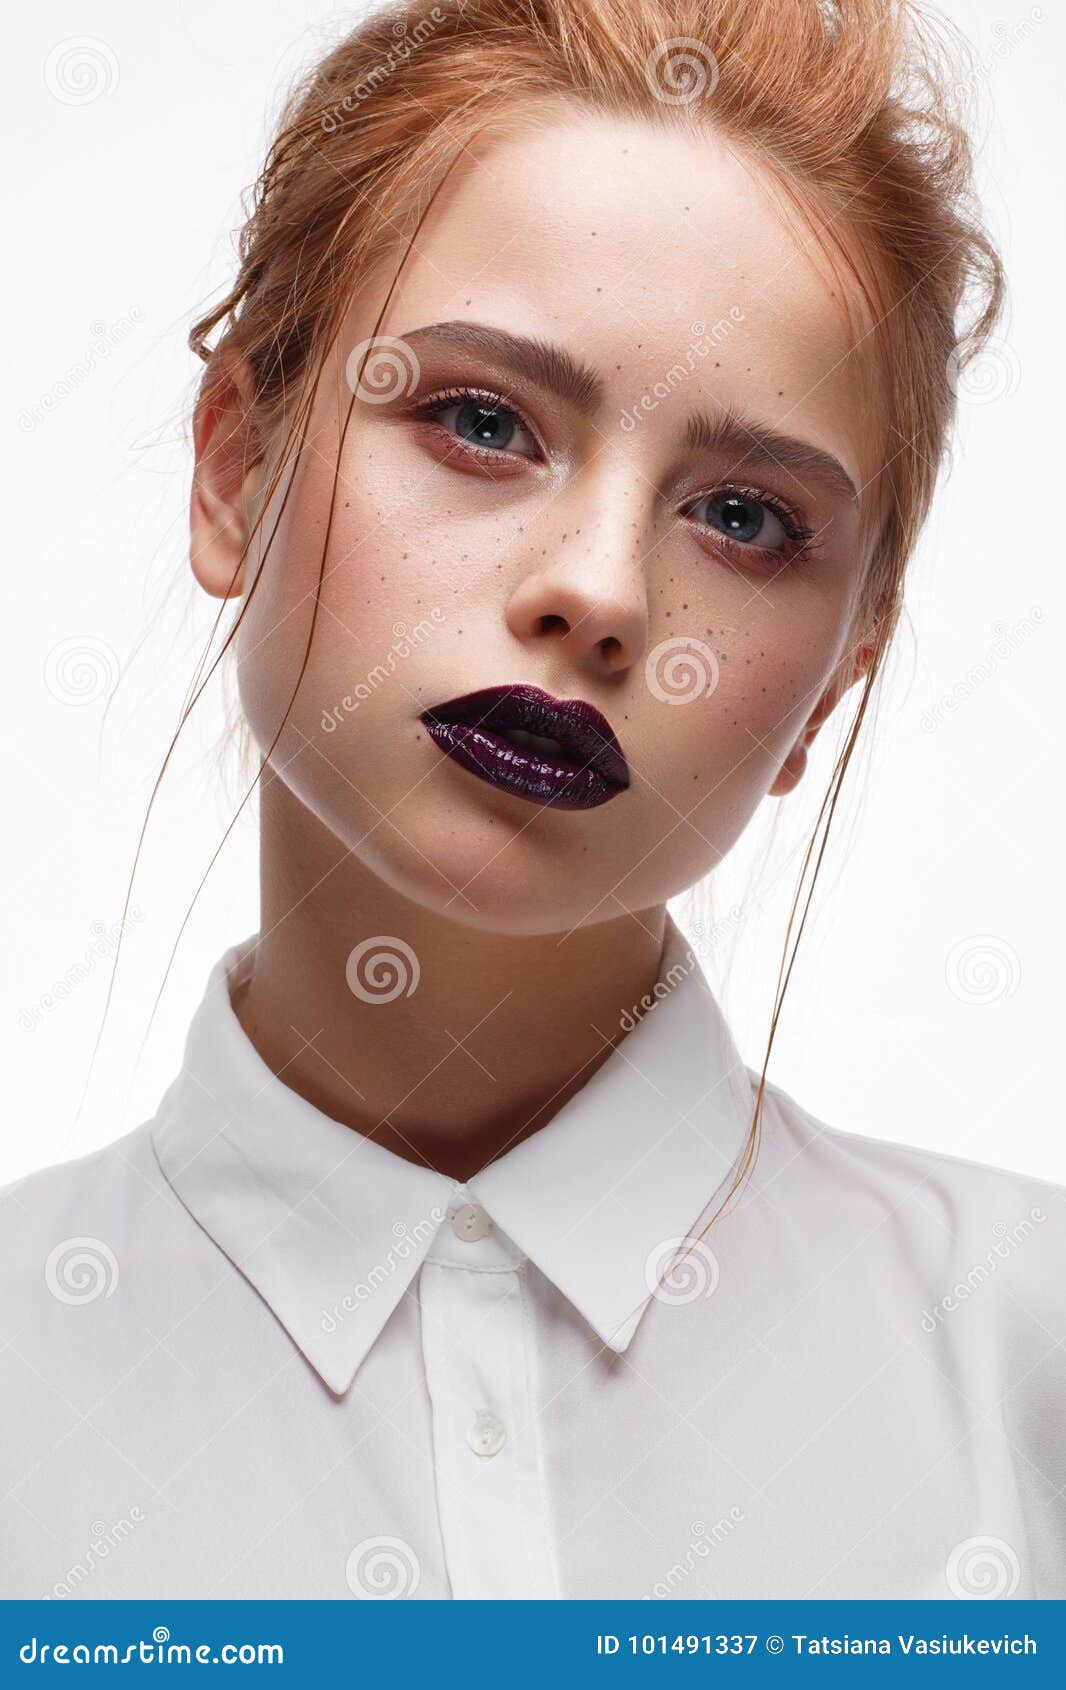 Young Girl with a Haircut in a White Shirt. Beautiful Model with Nude  Make-up and Bright Lips Stock Image - Image of makeup, brown: 101491337